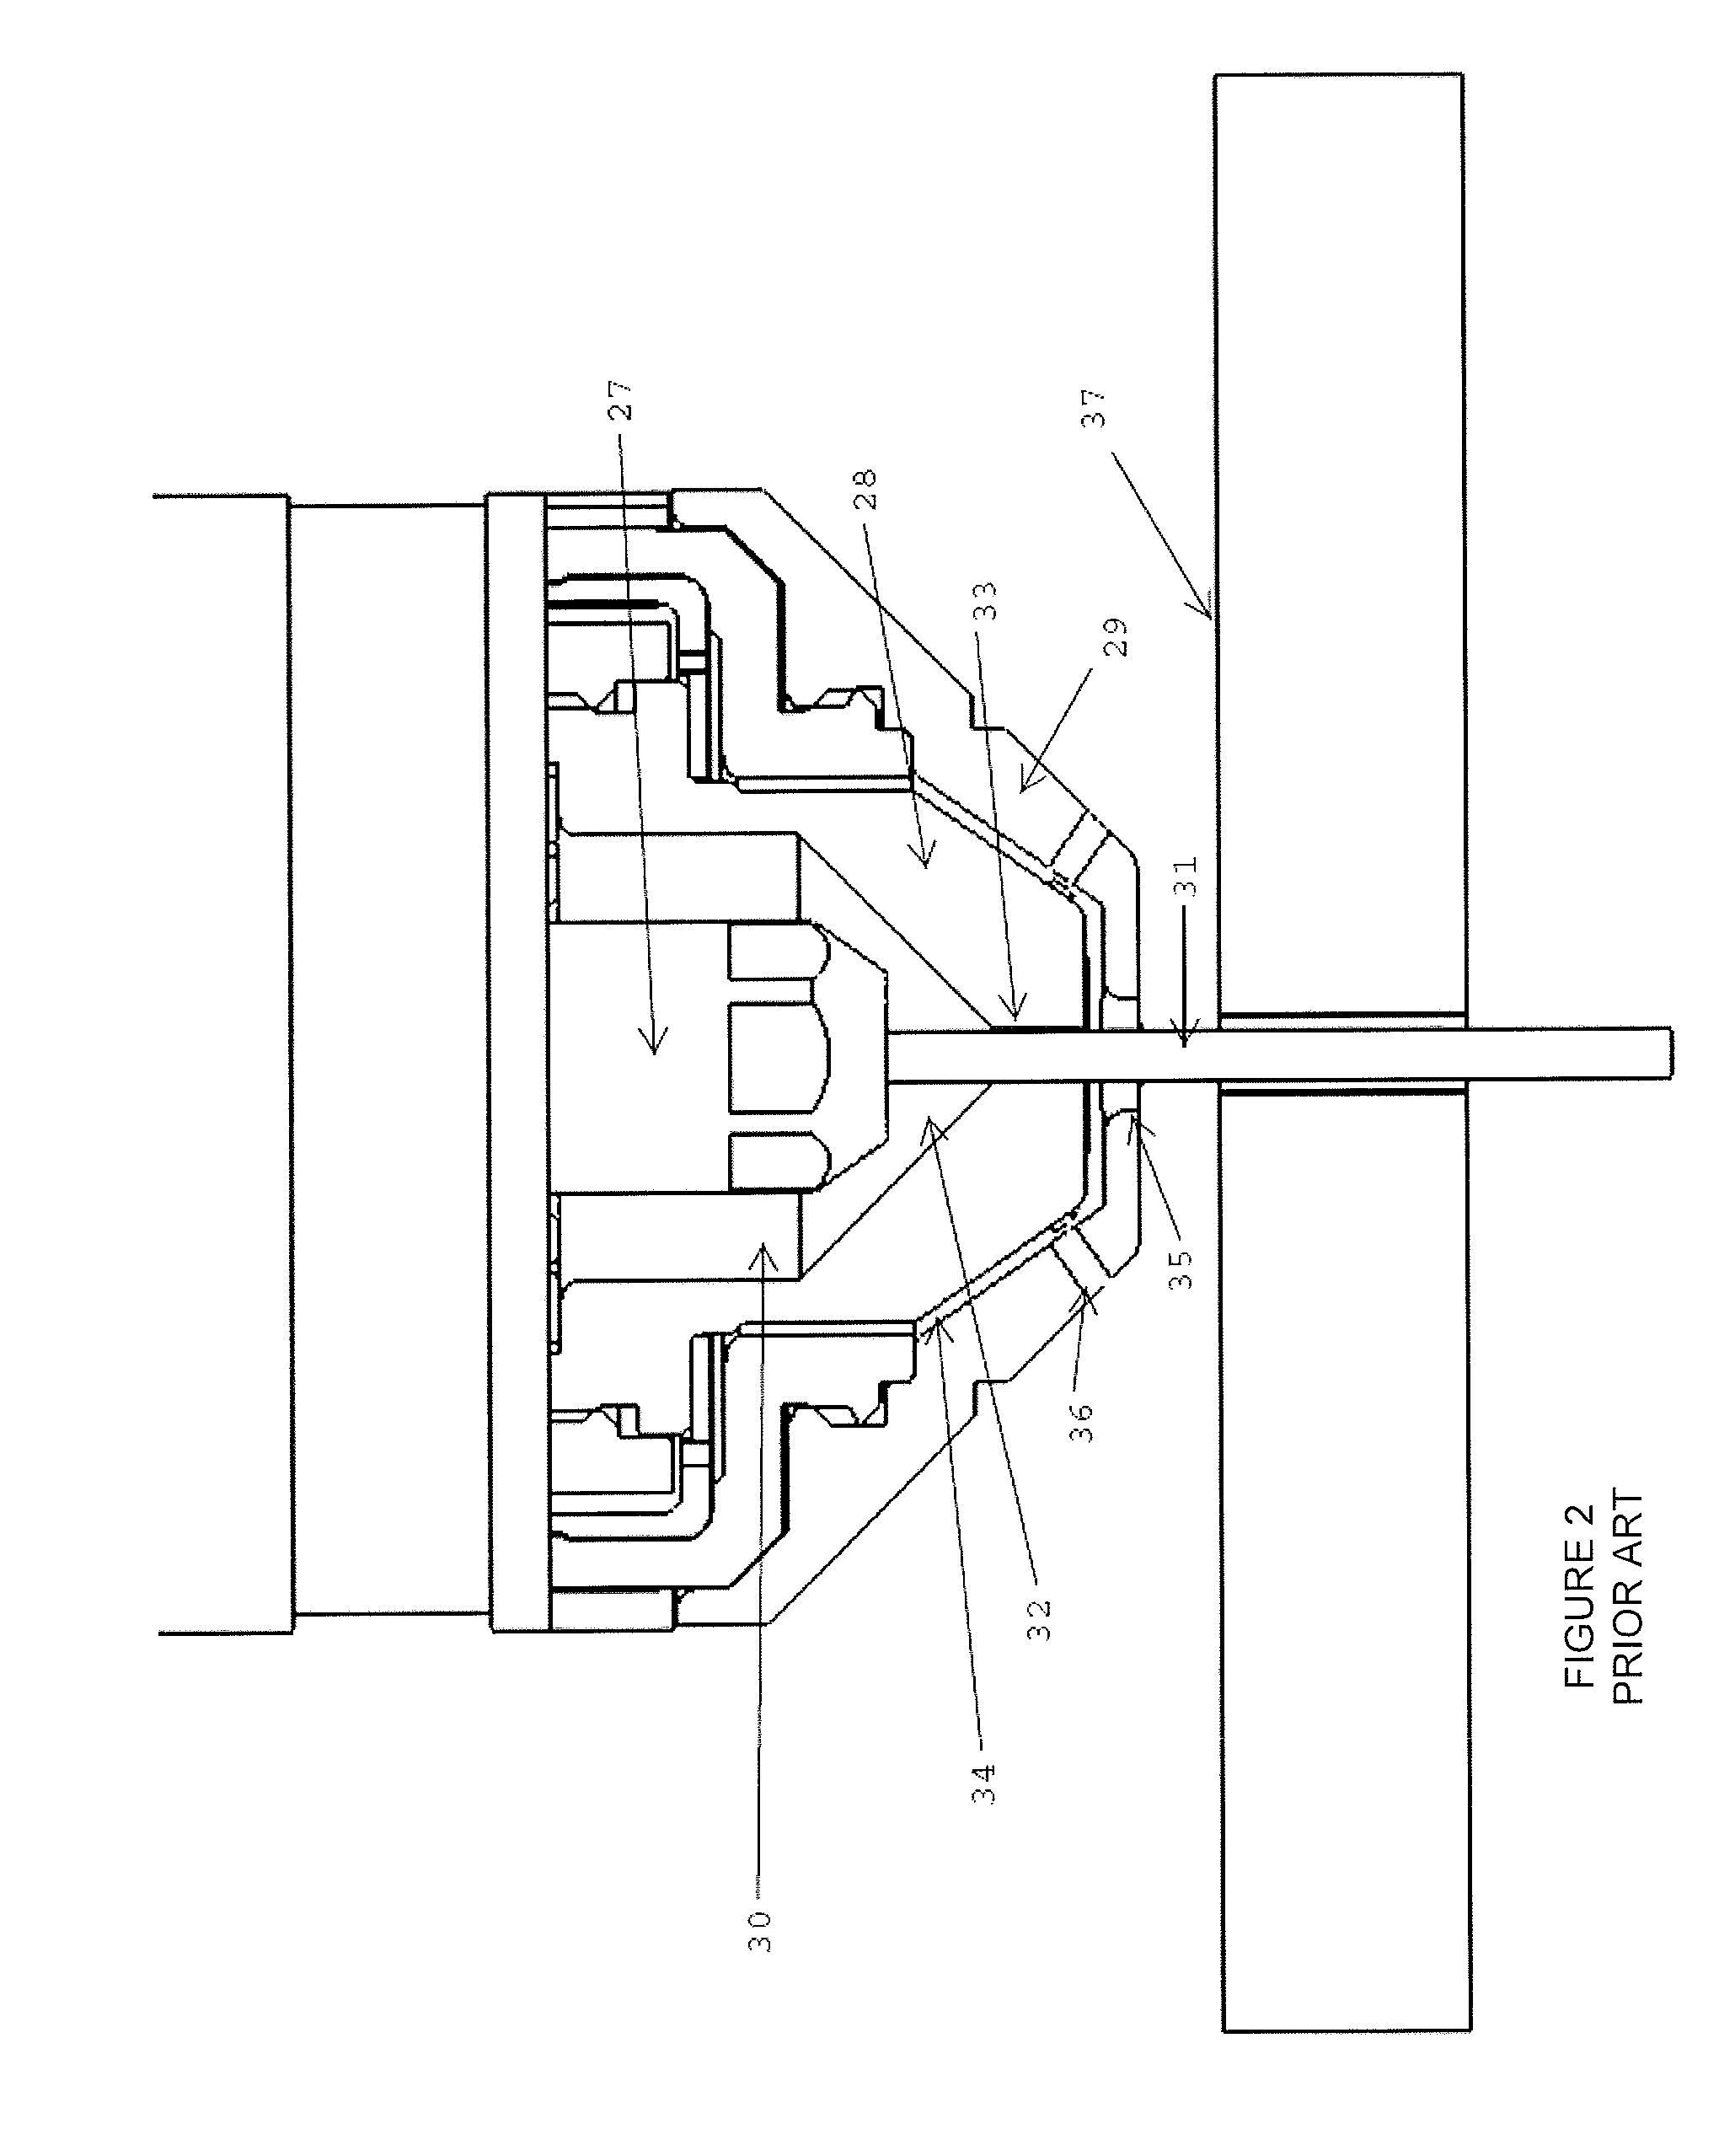 Method and Apparatus for Cutting High Quality Internal Features and Contours